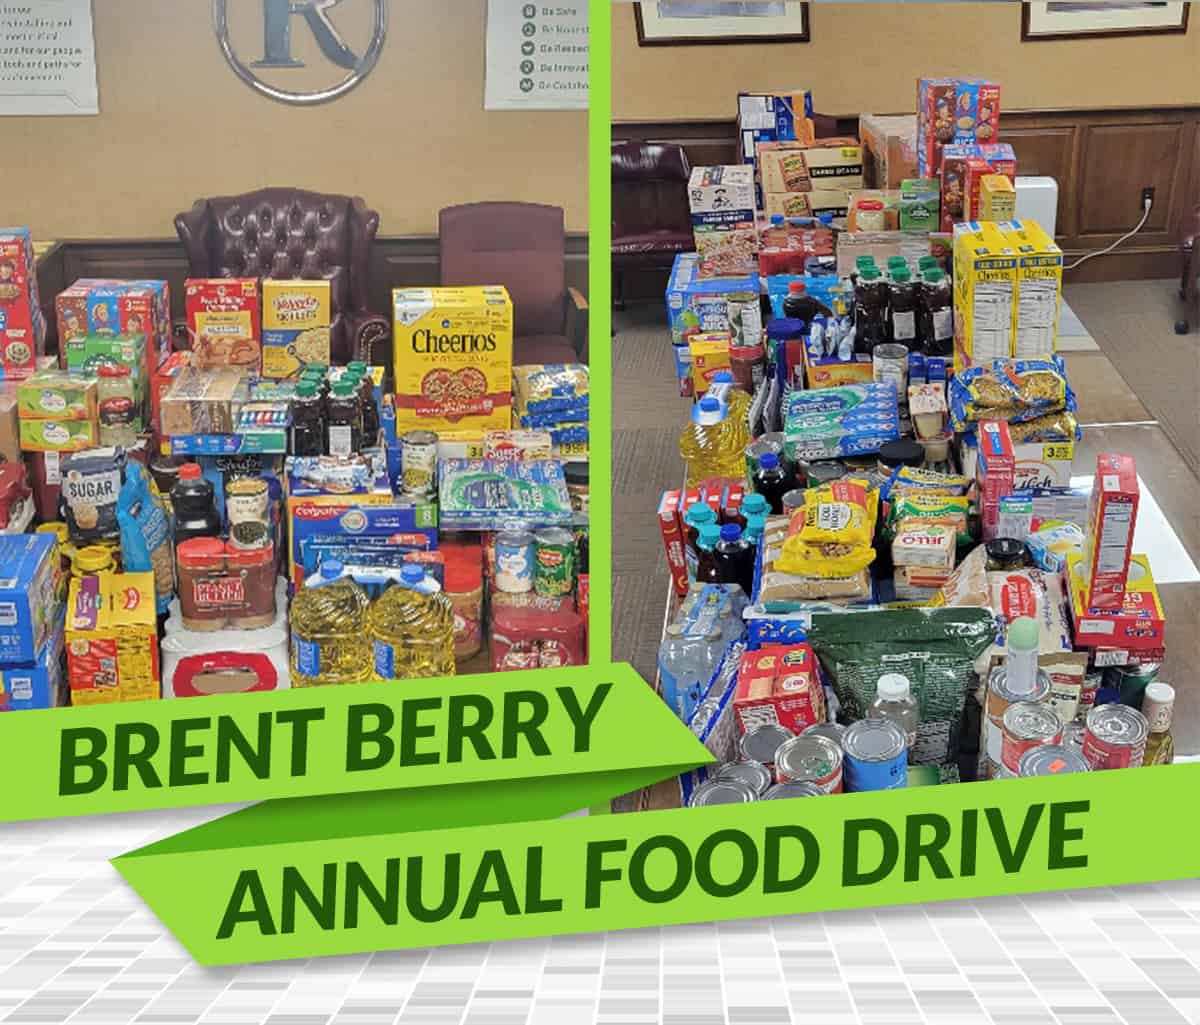 Donations from the Brent Berry Annual Food Drive